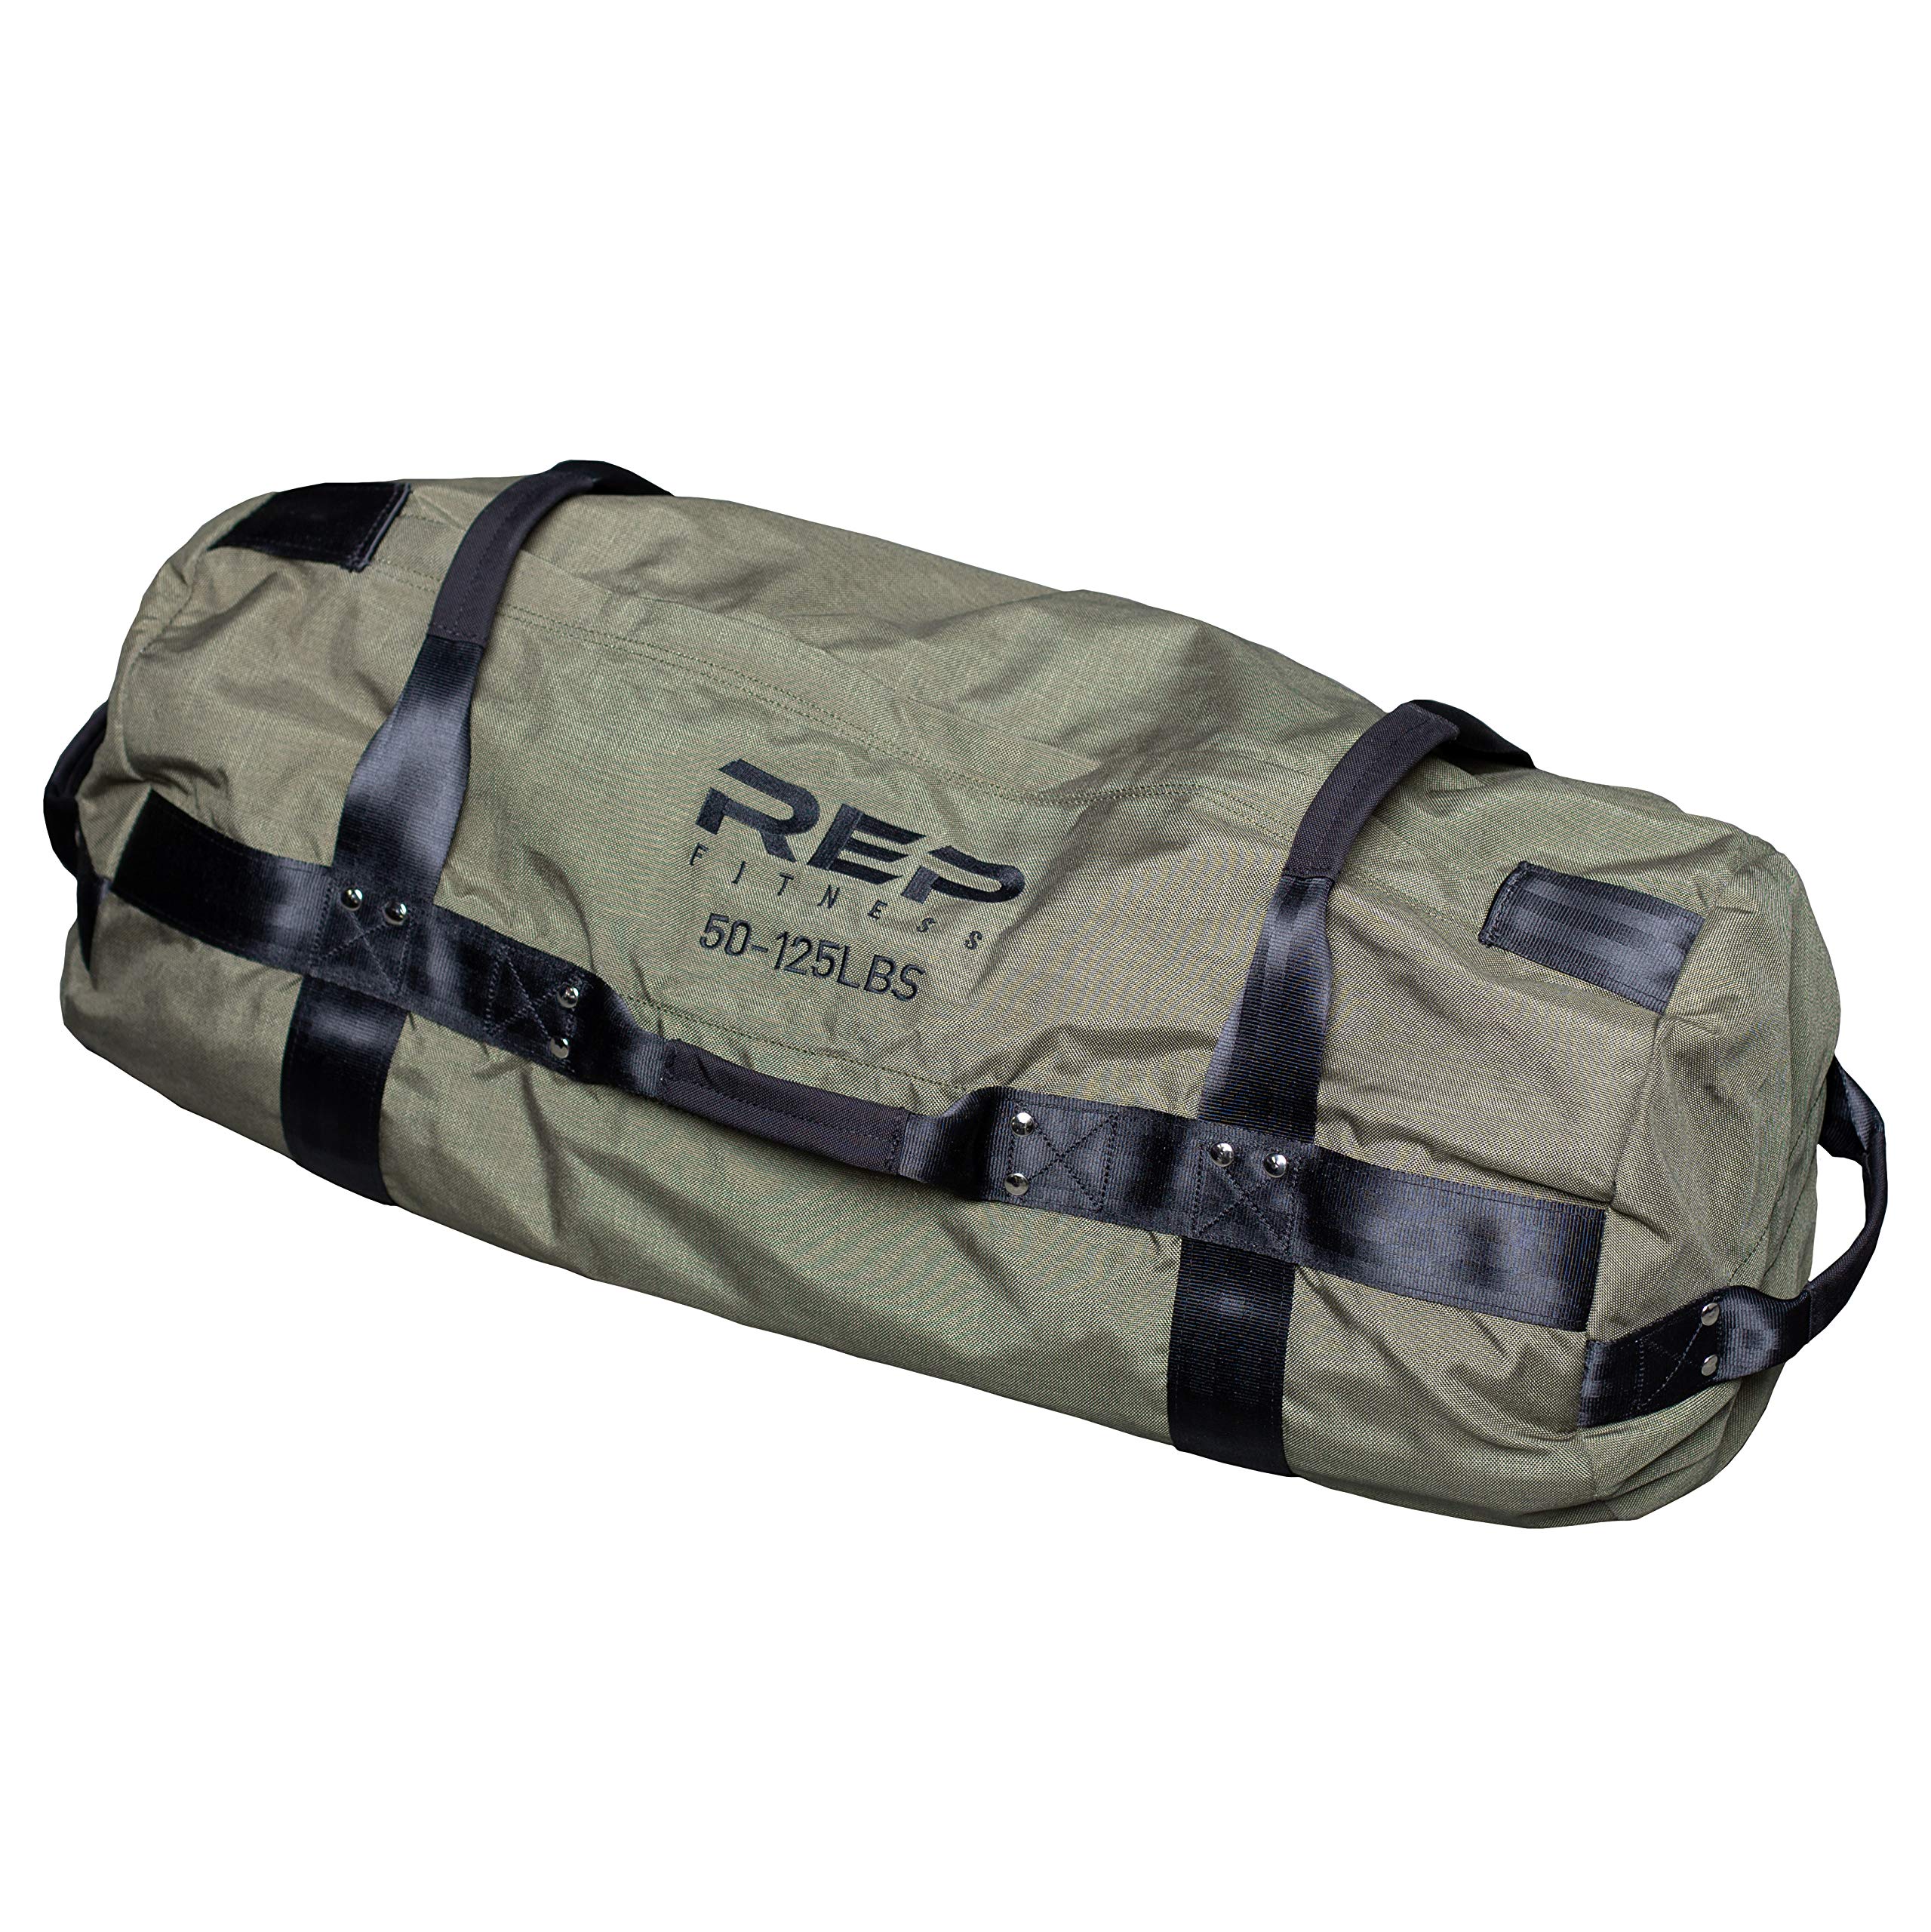 Yes4all Workout Sandbags, Heavy Duty Sandbags for Fitness, Conditioning, MMA & Combat Sports - Army Green - S